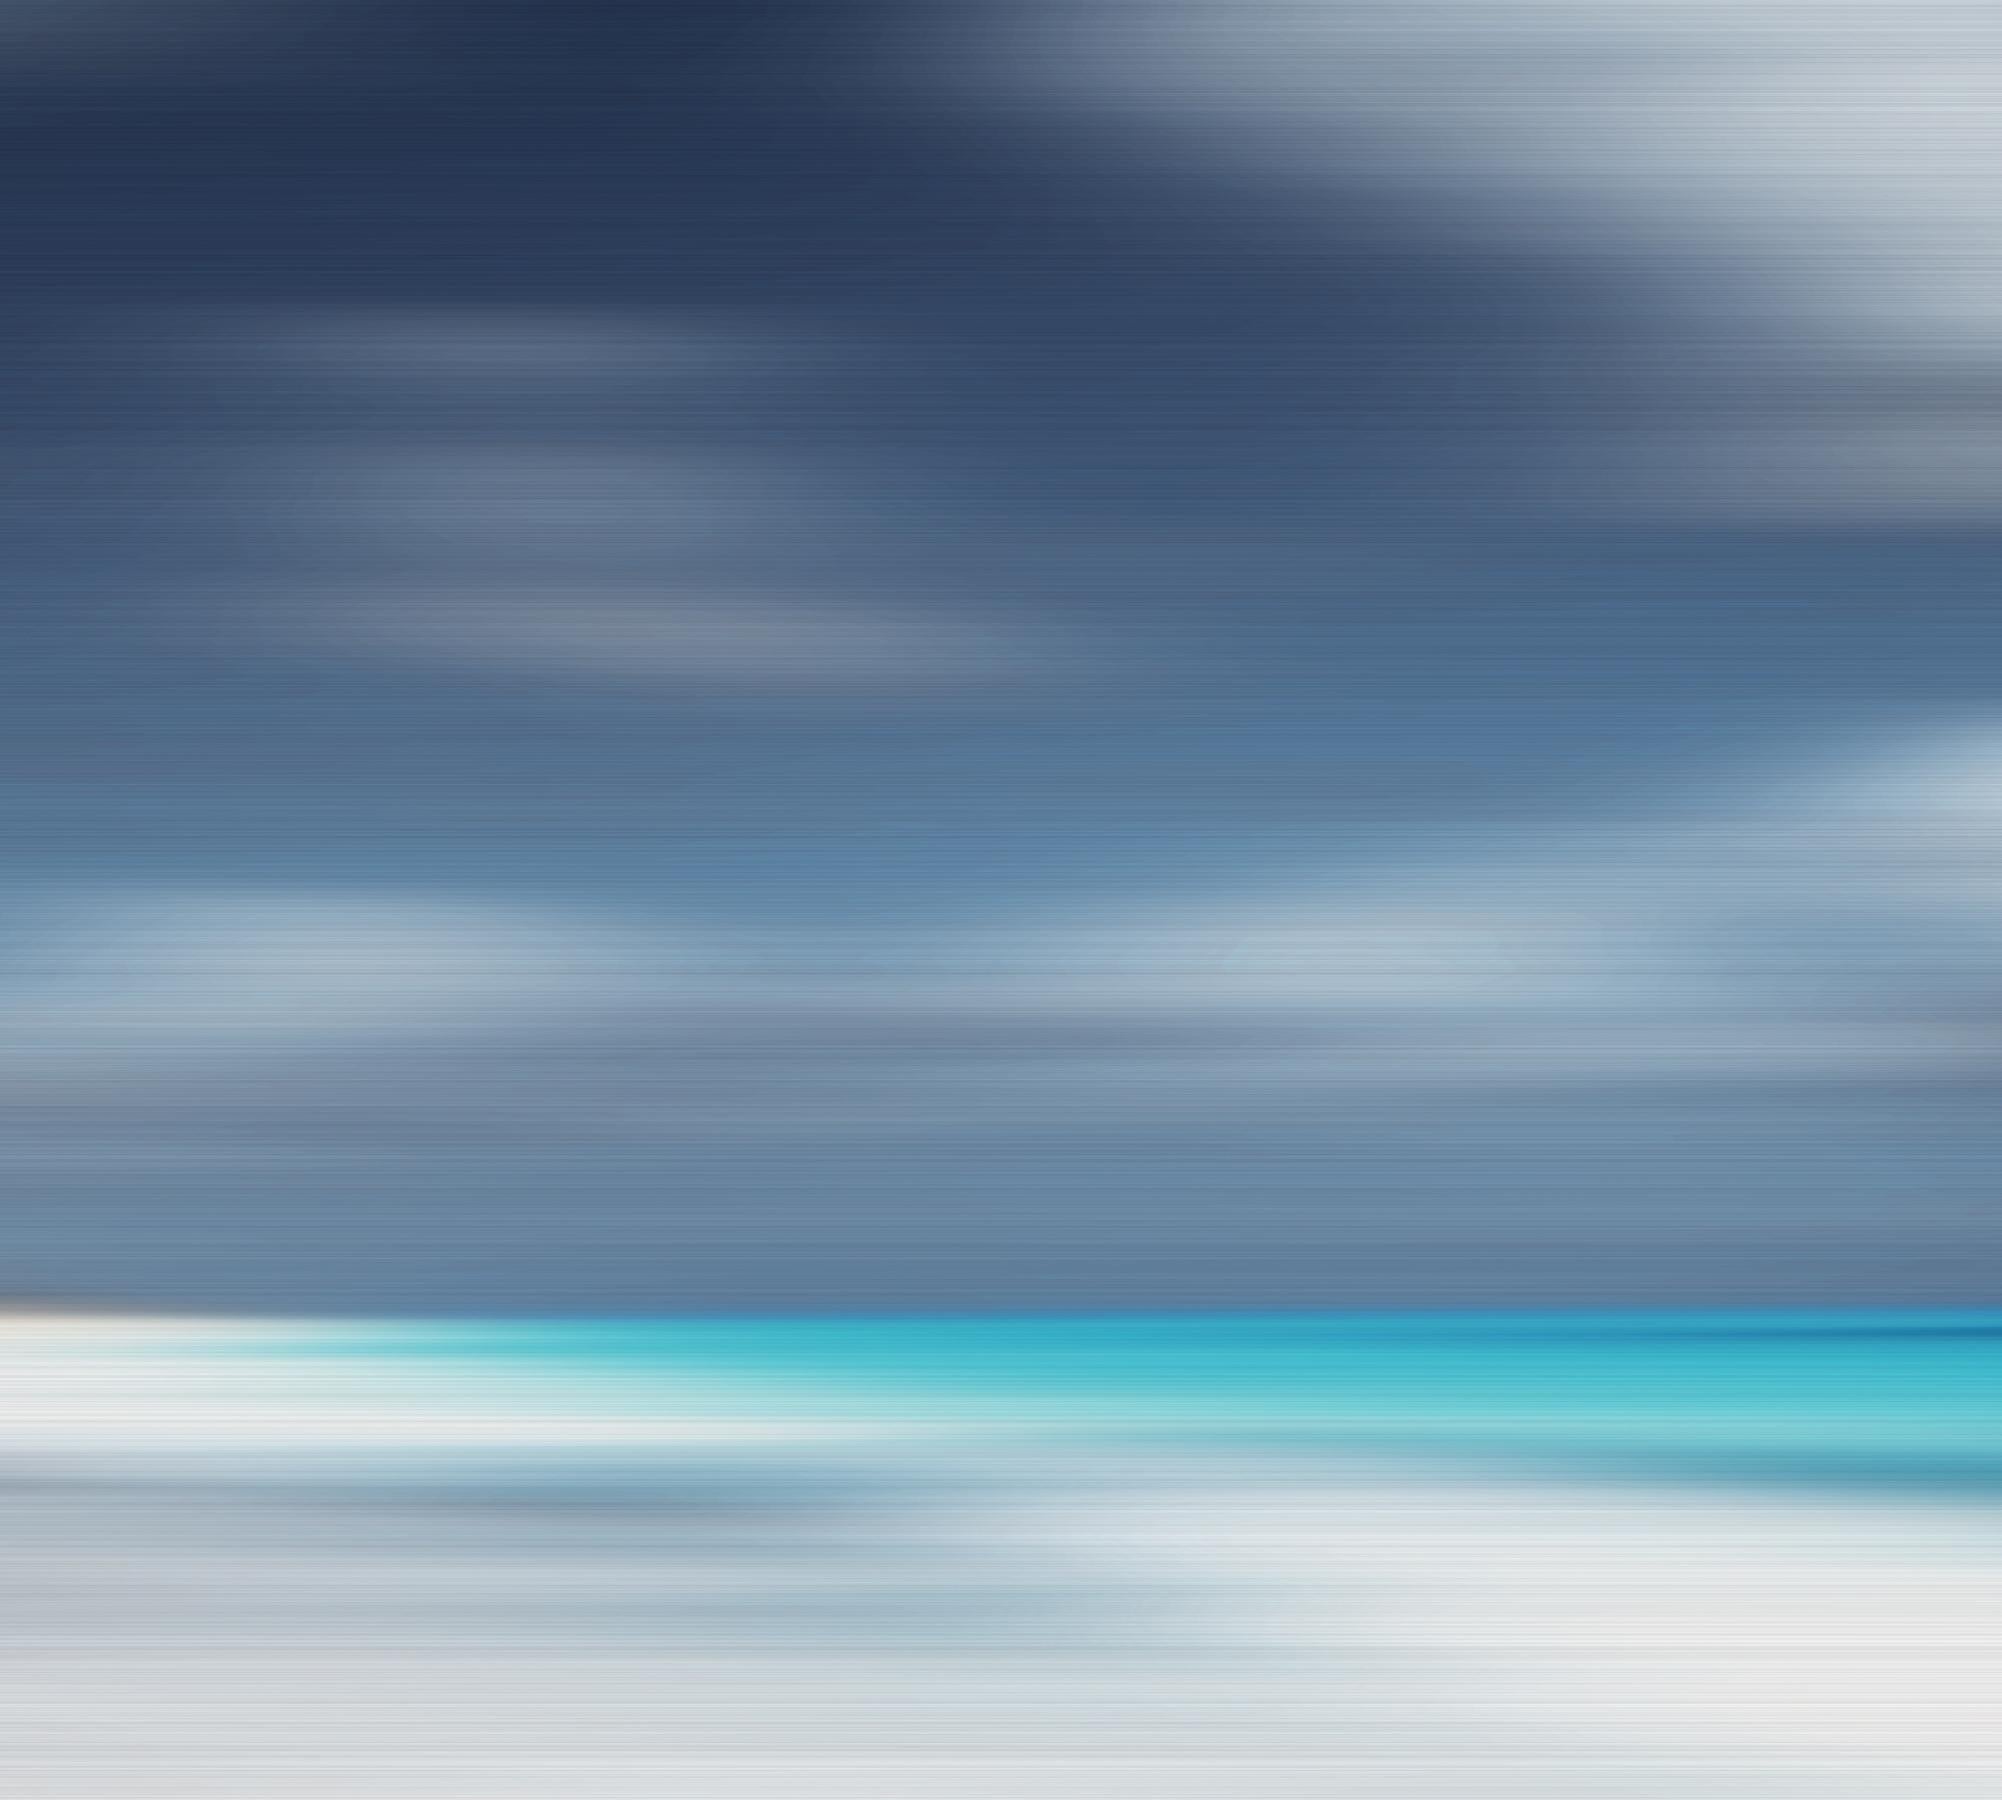 Cerulean - nature, contemporary, abstracted landscape, photography on dibond - Contemporary Photograph by Etienne Labbe